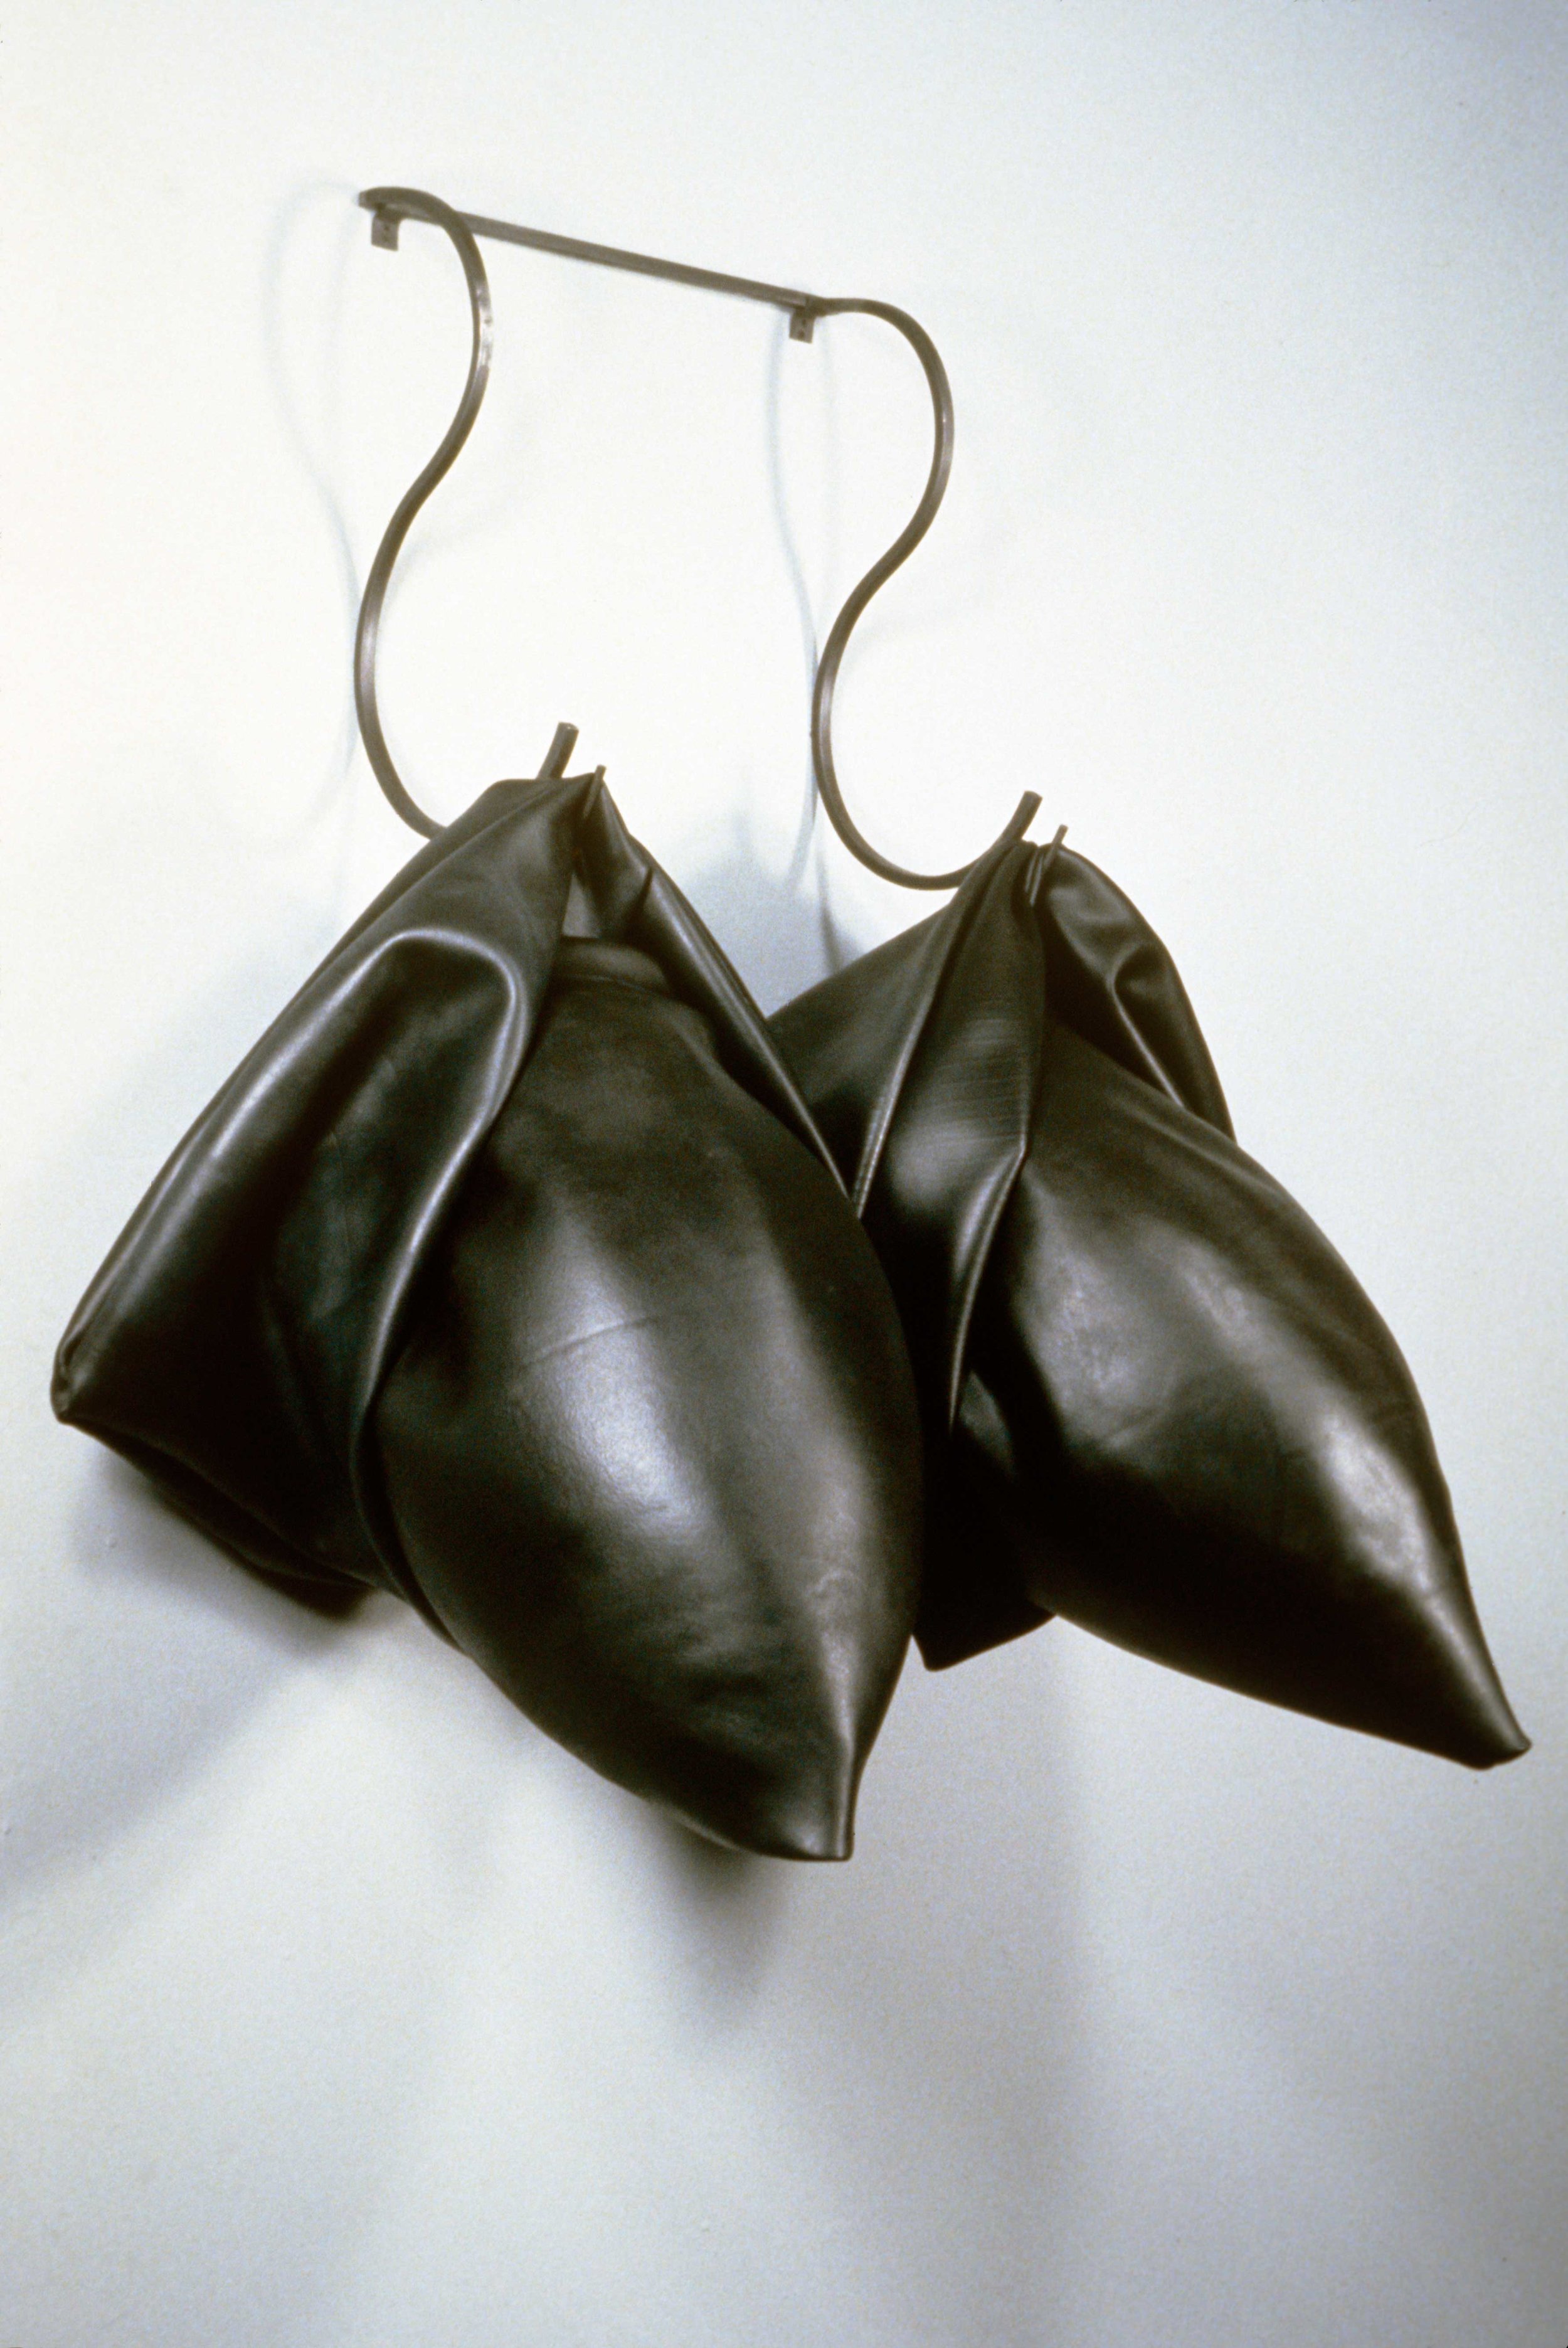   Twin Missiles   1990  rubber and steel  49 X 32 X 23"   